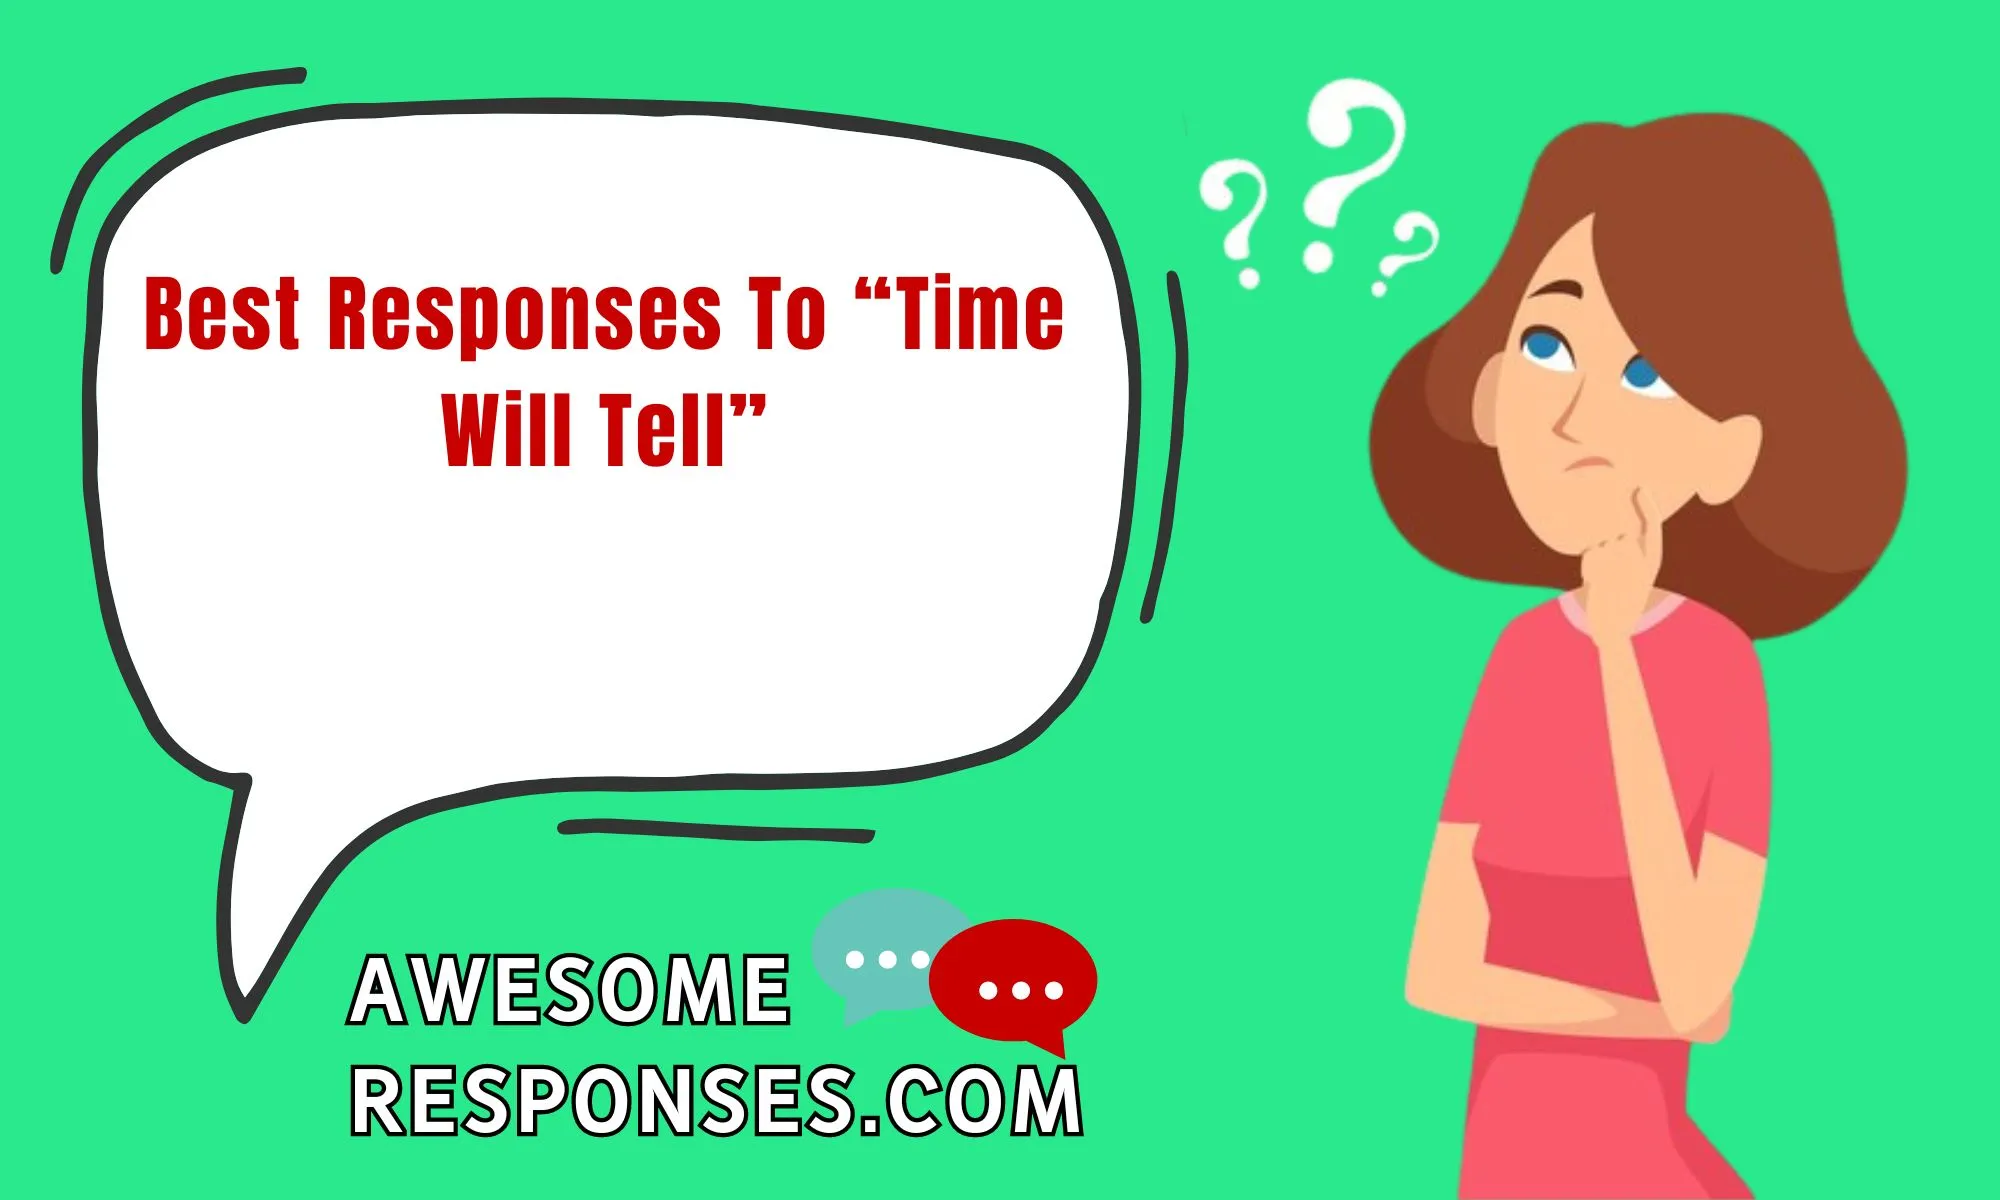 Best Responses To “Time Will Tell”